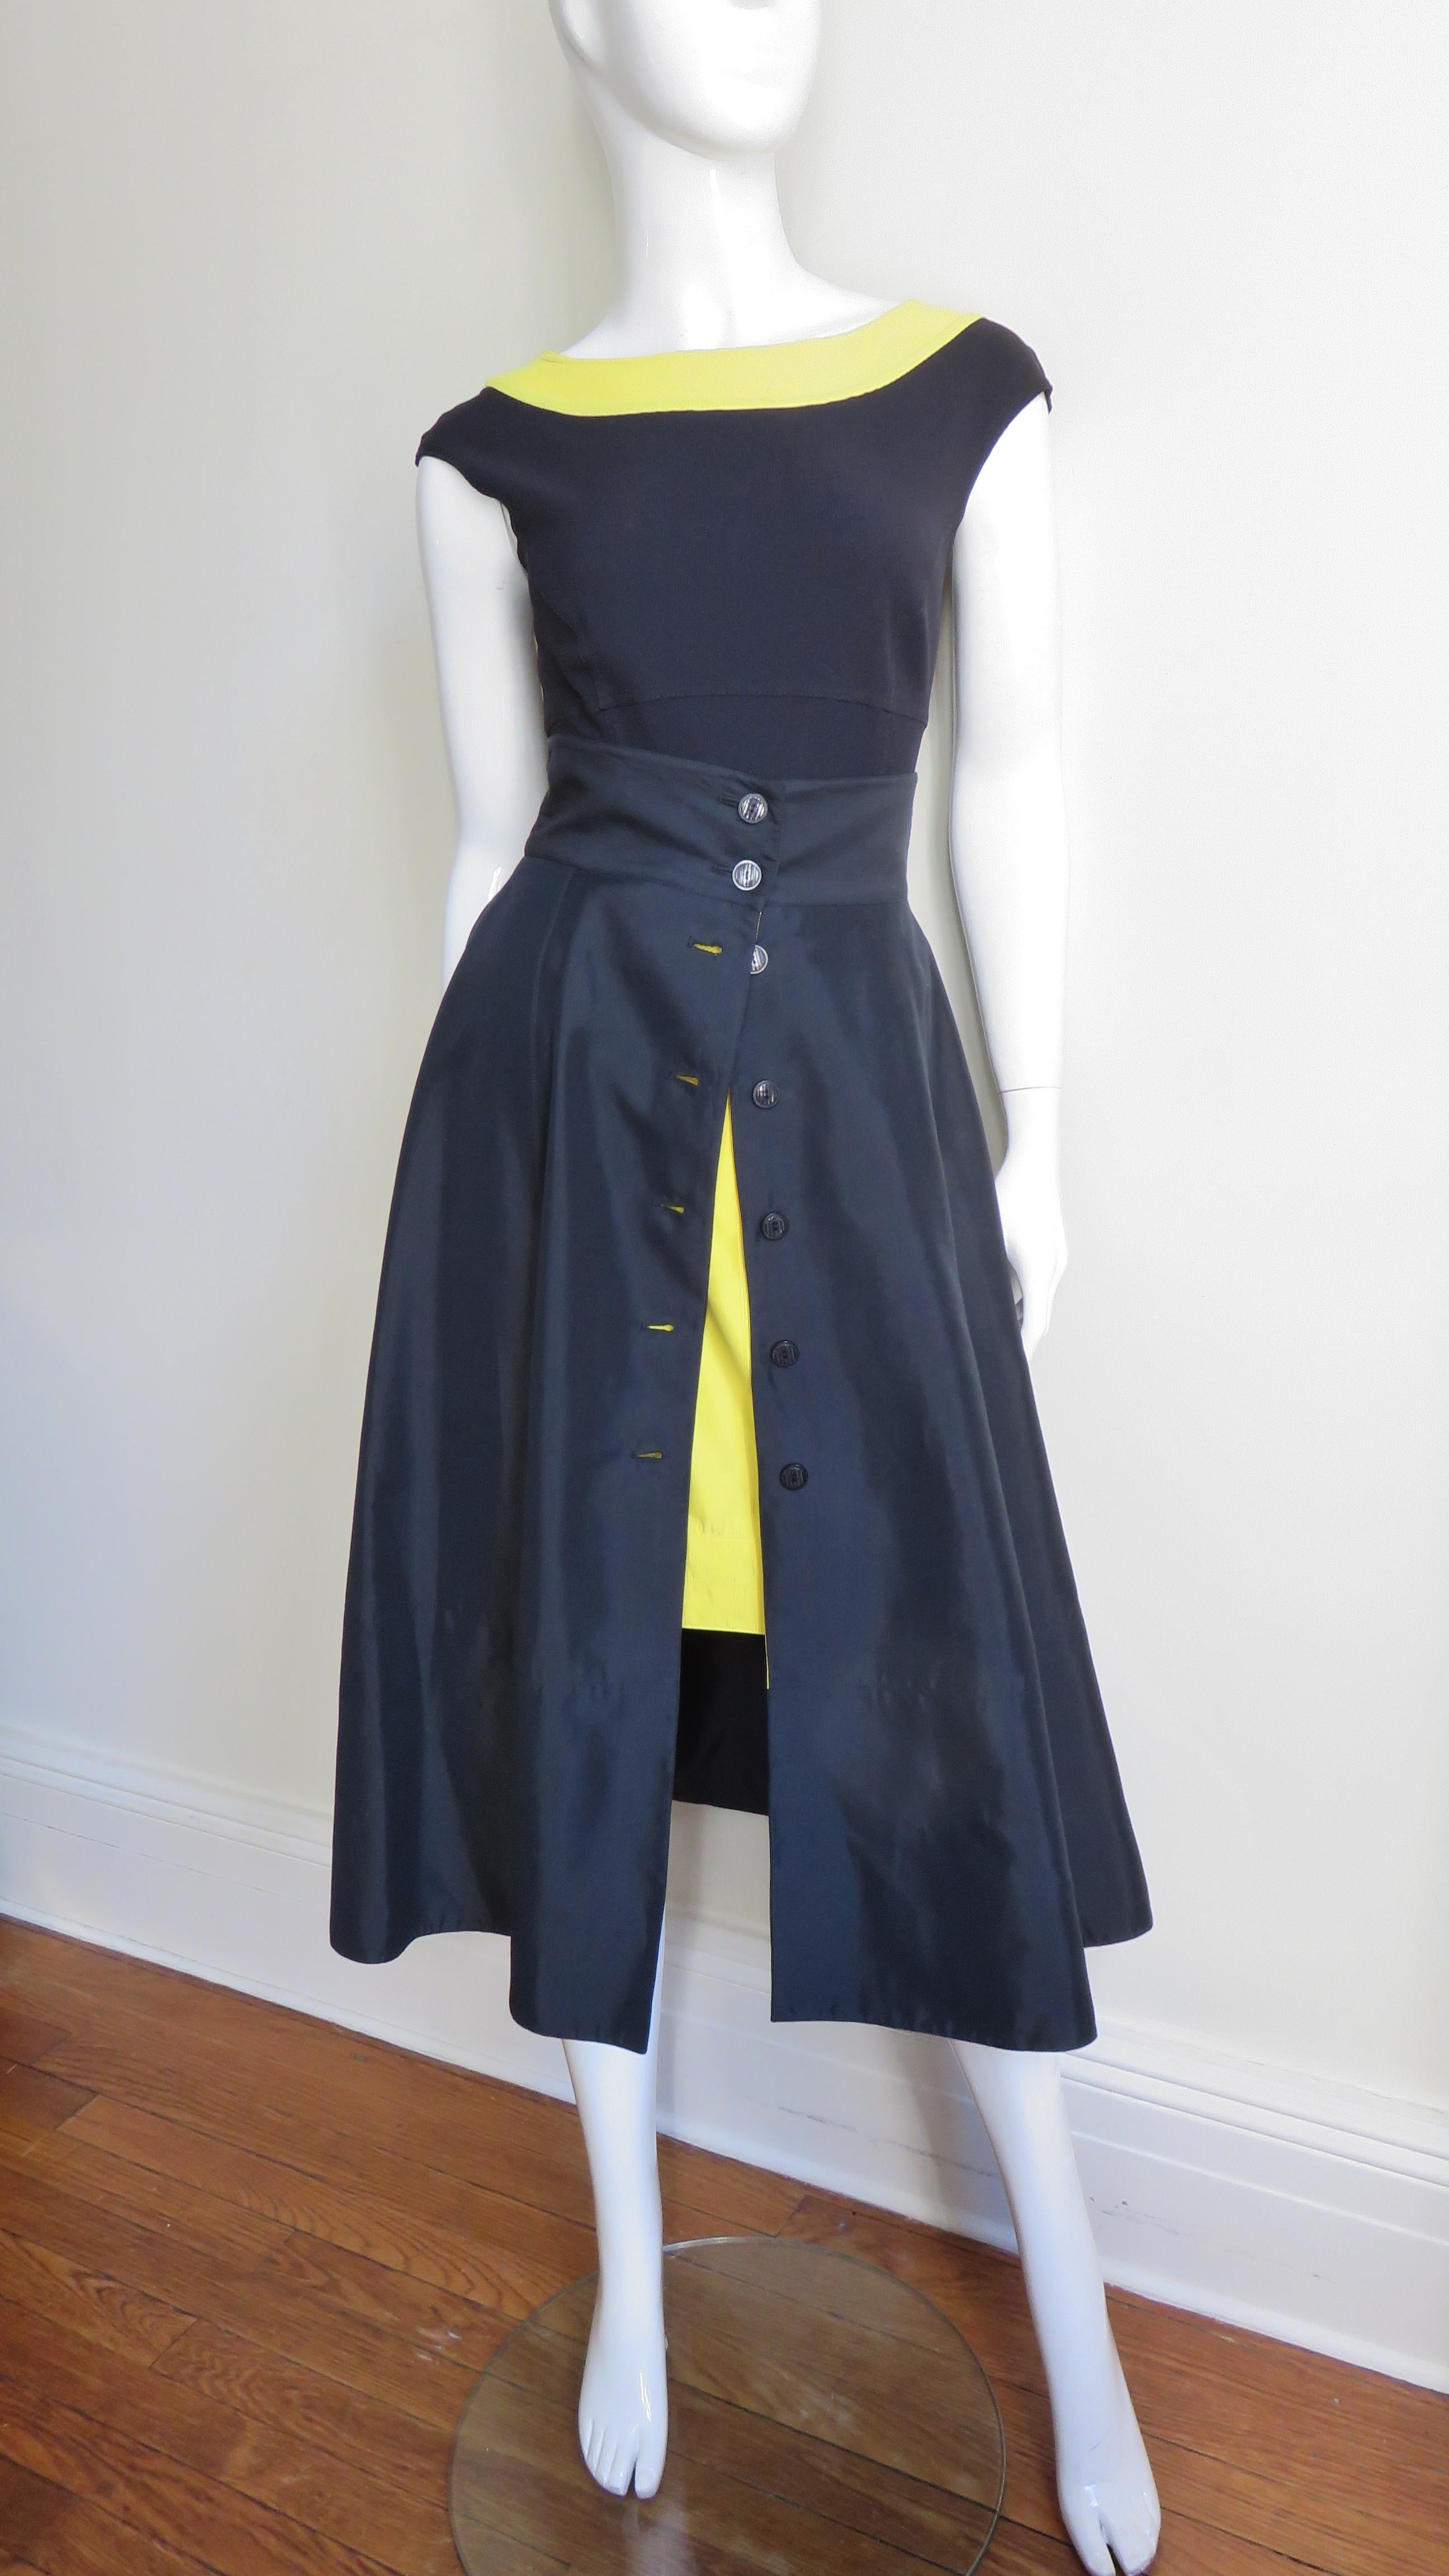 A fabulous silk/cotton blend set from Claude Montana in bright yellow and black.  The 3 piece set consists of a yellow pencil skirt with top stitching detail around the hemline, a full button front mid calf length skirt black skirt with a matching